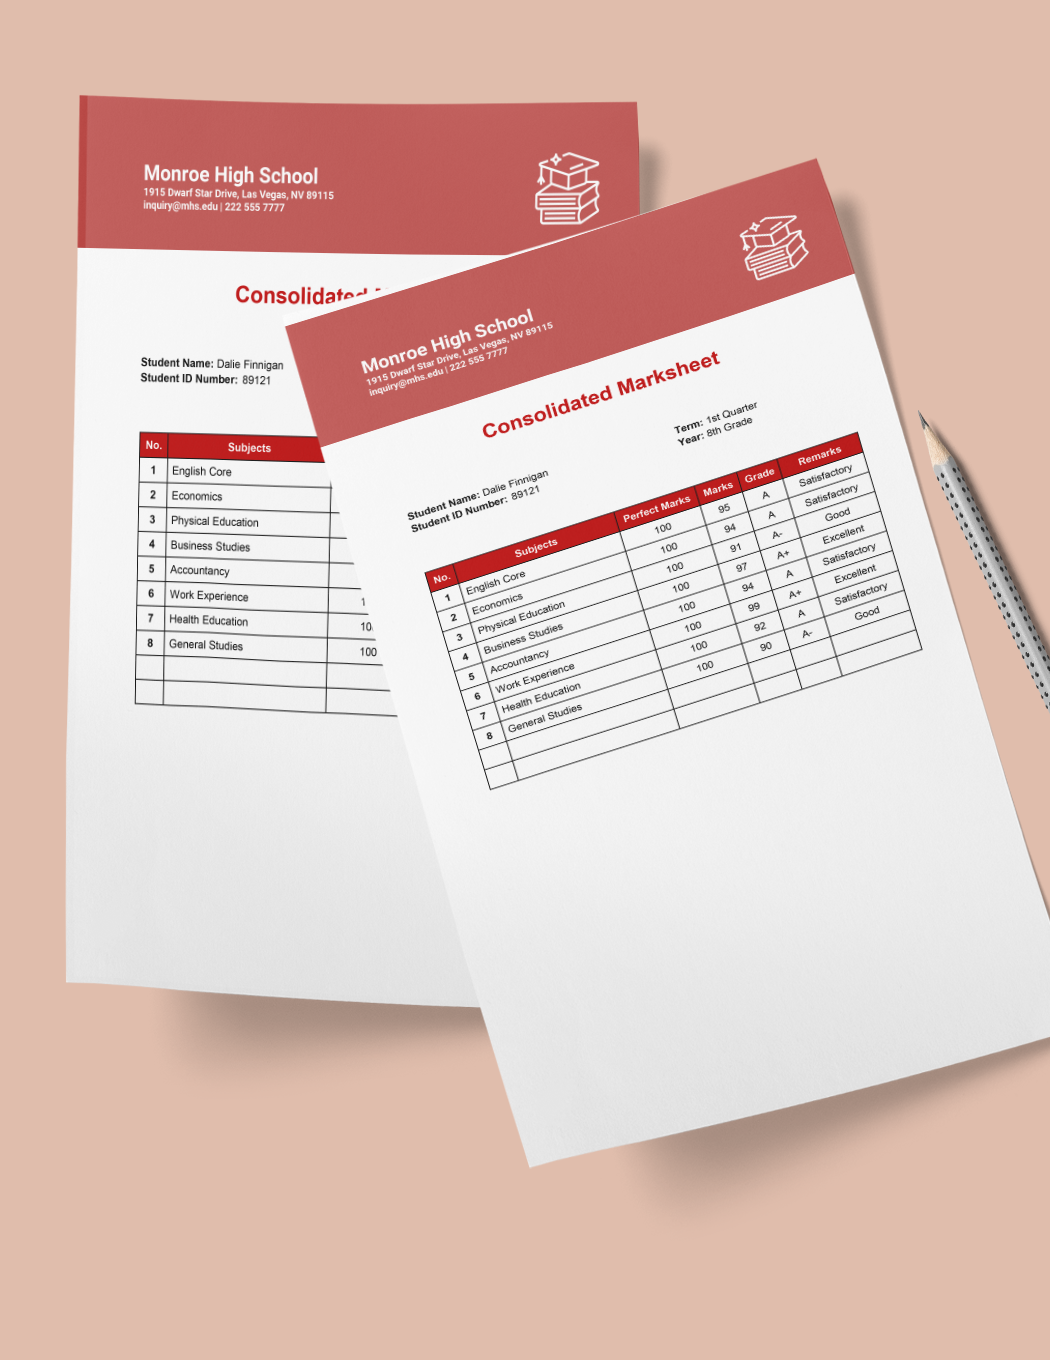 Consolidated Marksheet Template